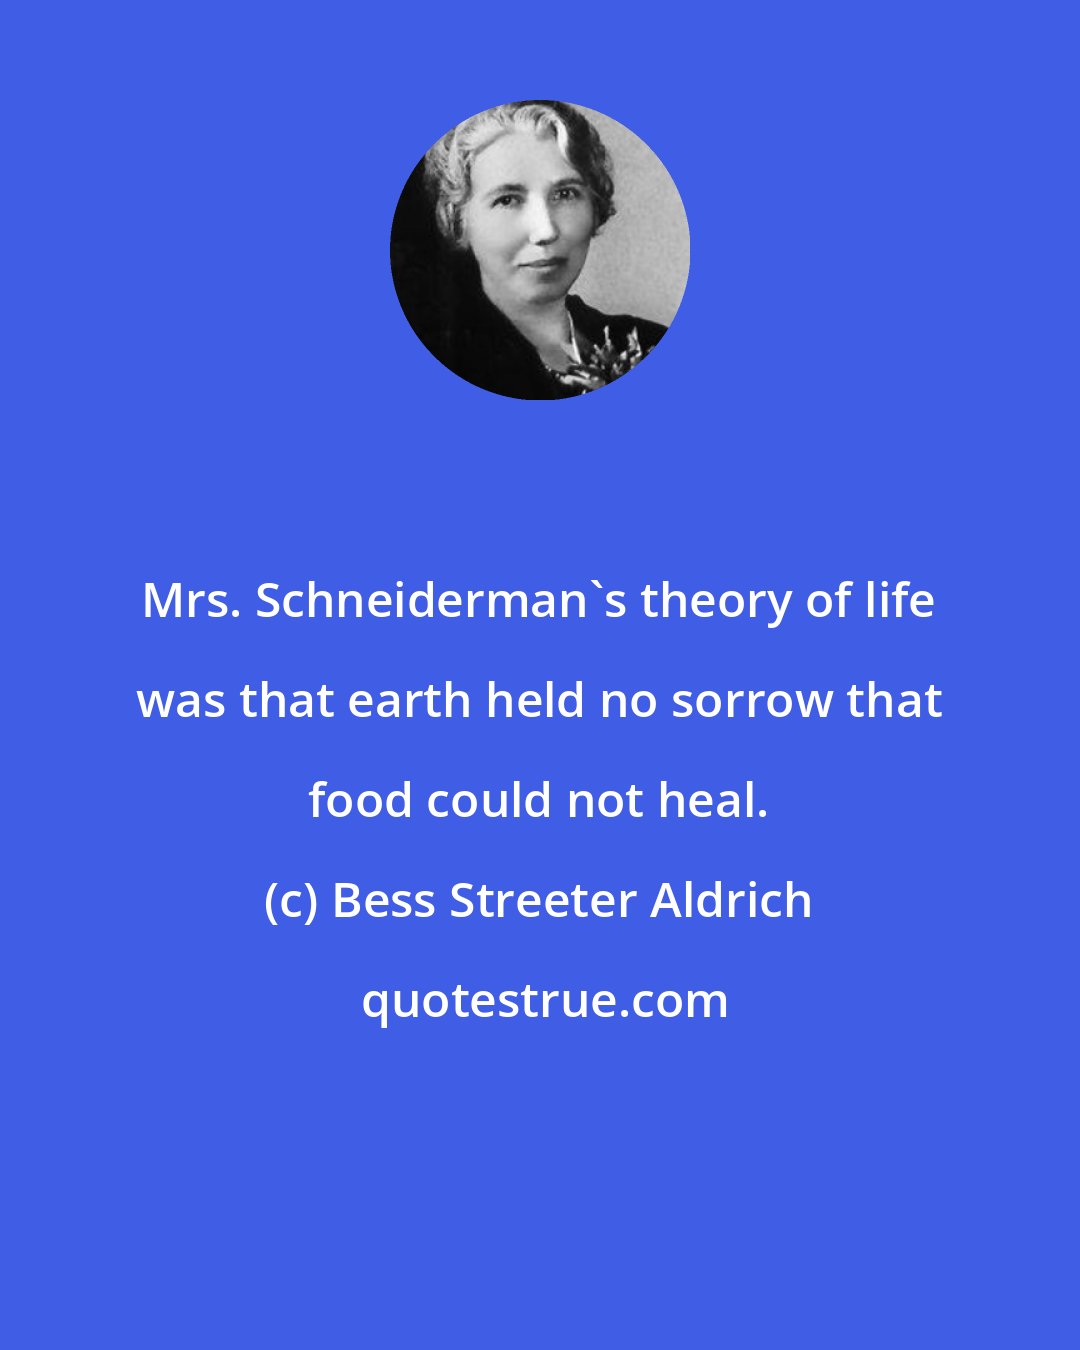 Bess Streeter Aldrich: Mrs. Schneiderman's theory of life was that earth held no sorrow that food could not heal.